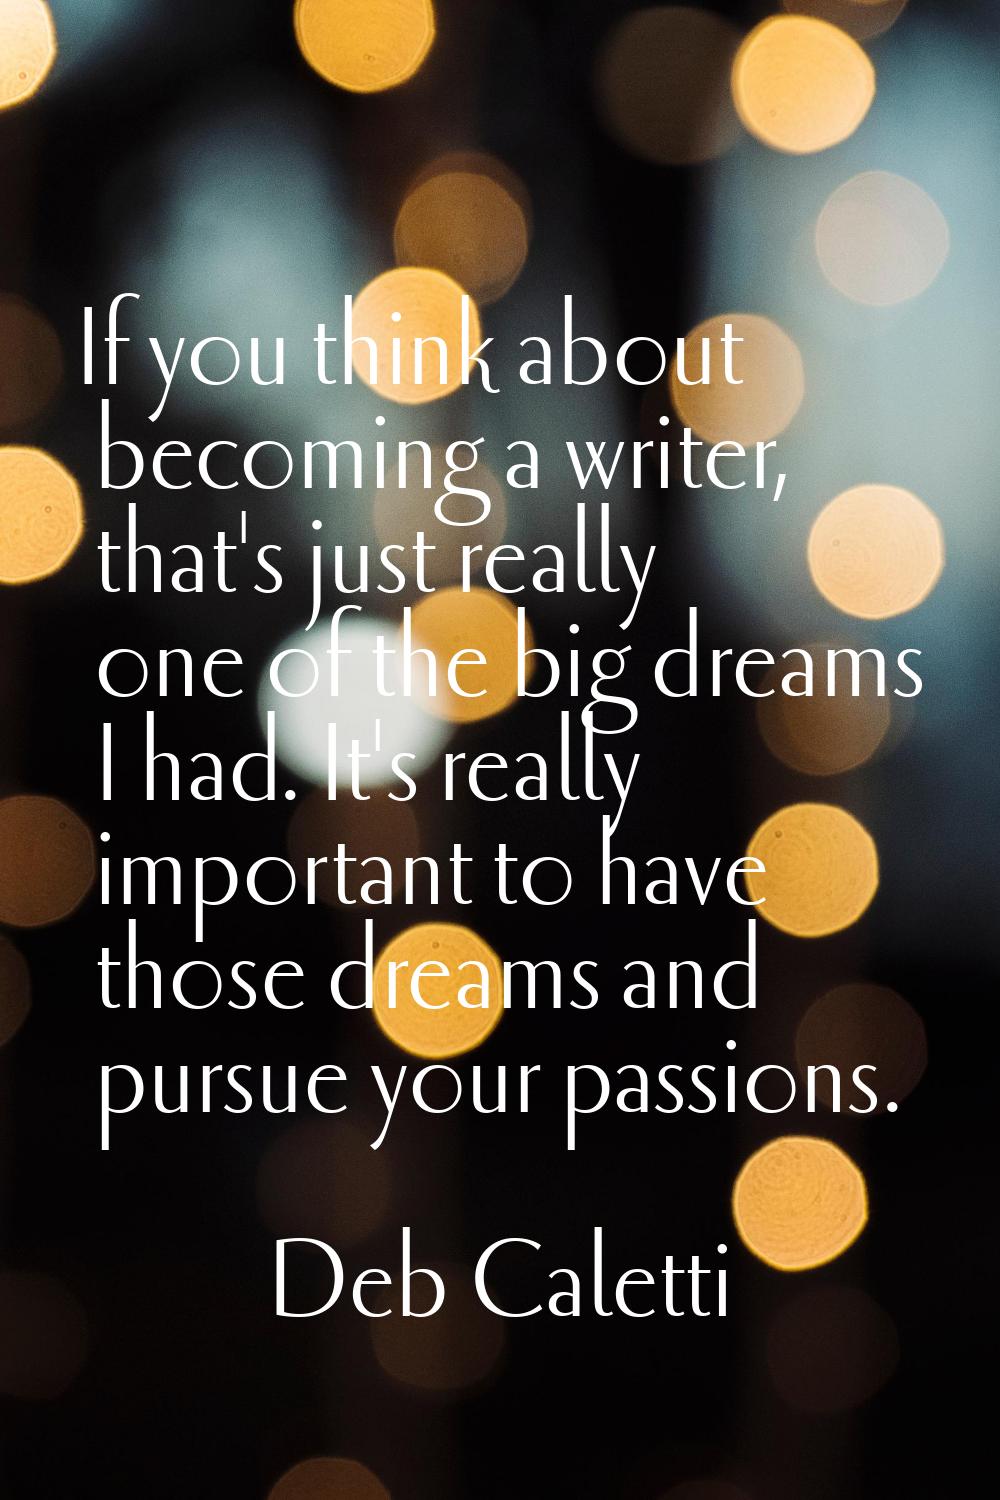 If you think about becoming a writer, that's just really one of the big dreams I had. It's really i